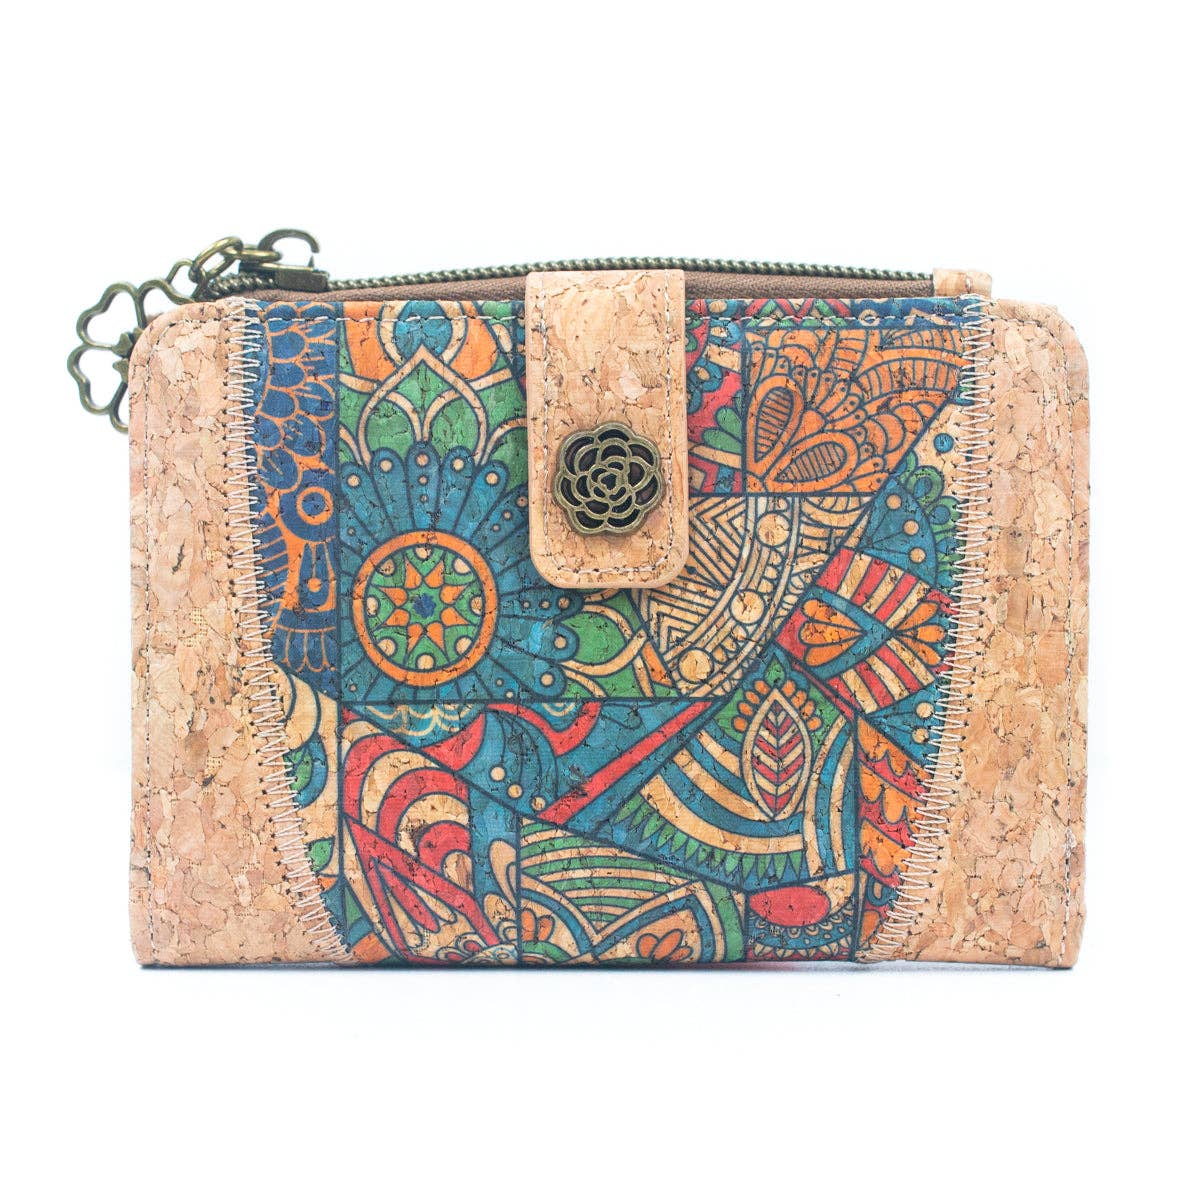 Natural Cork Floral-Print Women's Compact Wallet | THE CORK COLLECTION